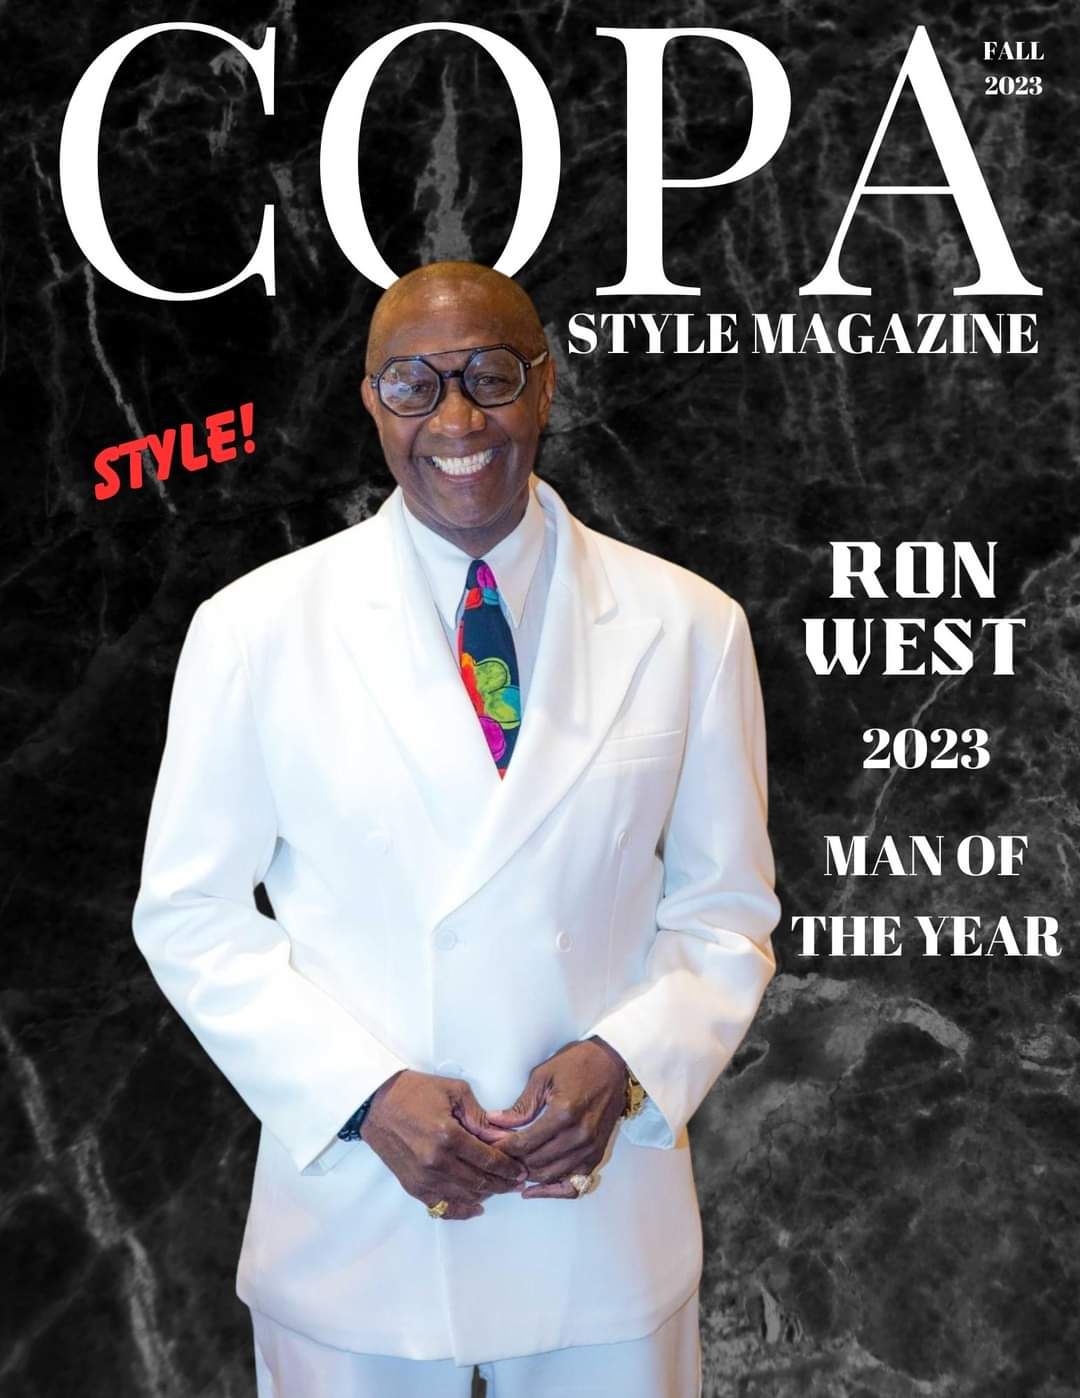 Ron West Celebration of "Man of the Year" Hosted by Copa Style Magazine 